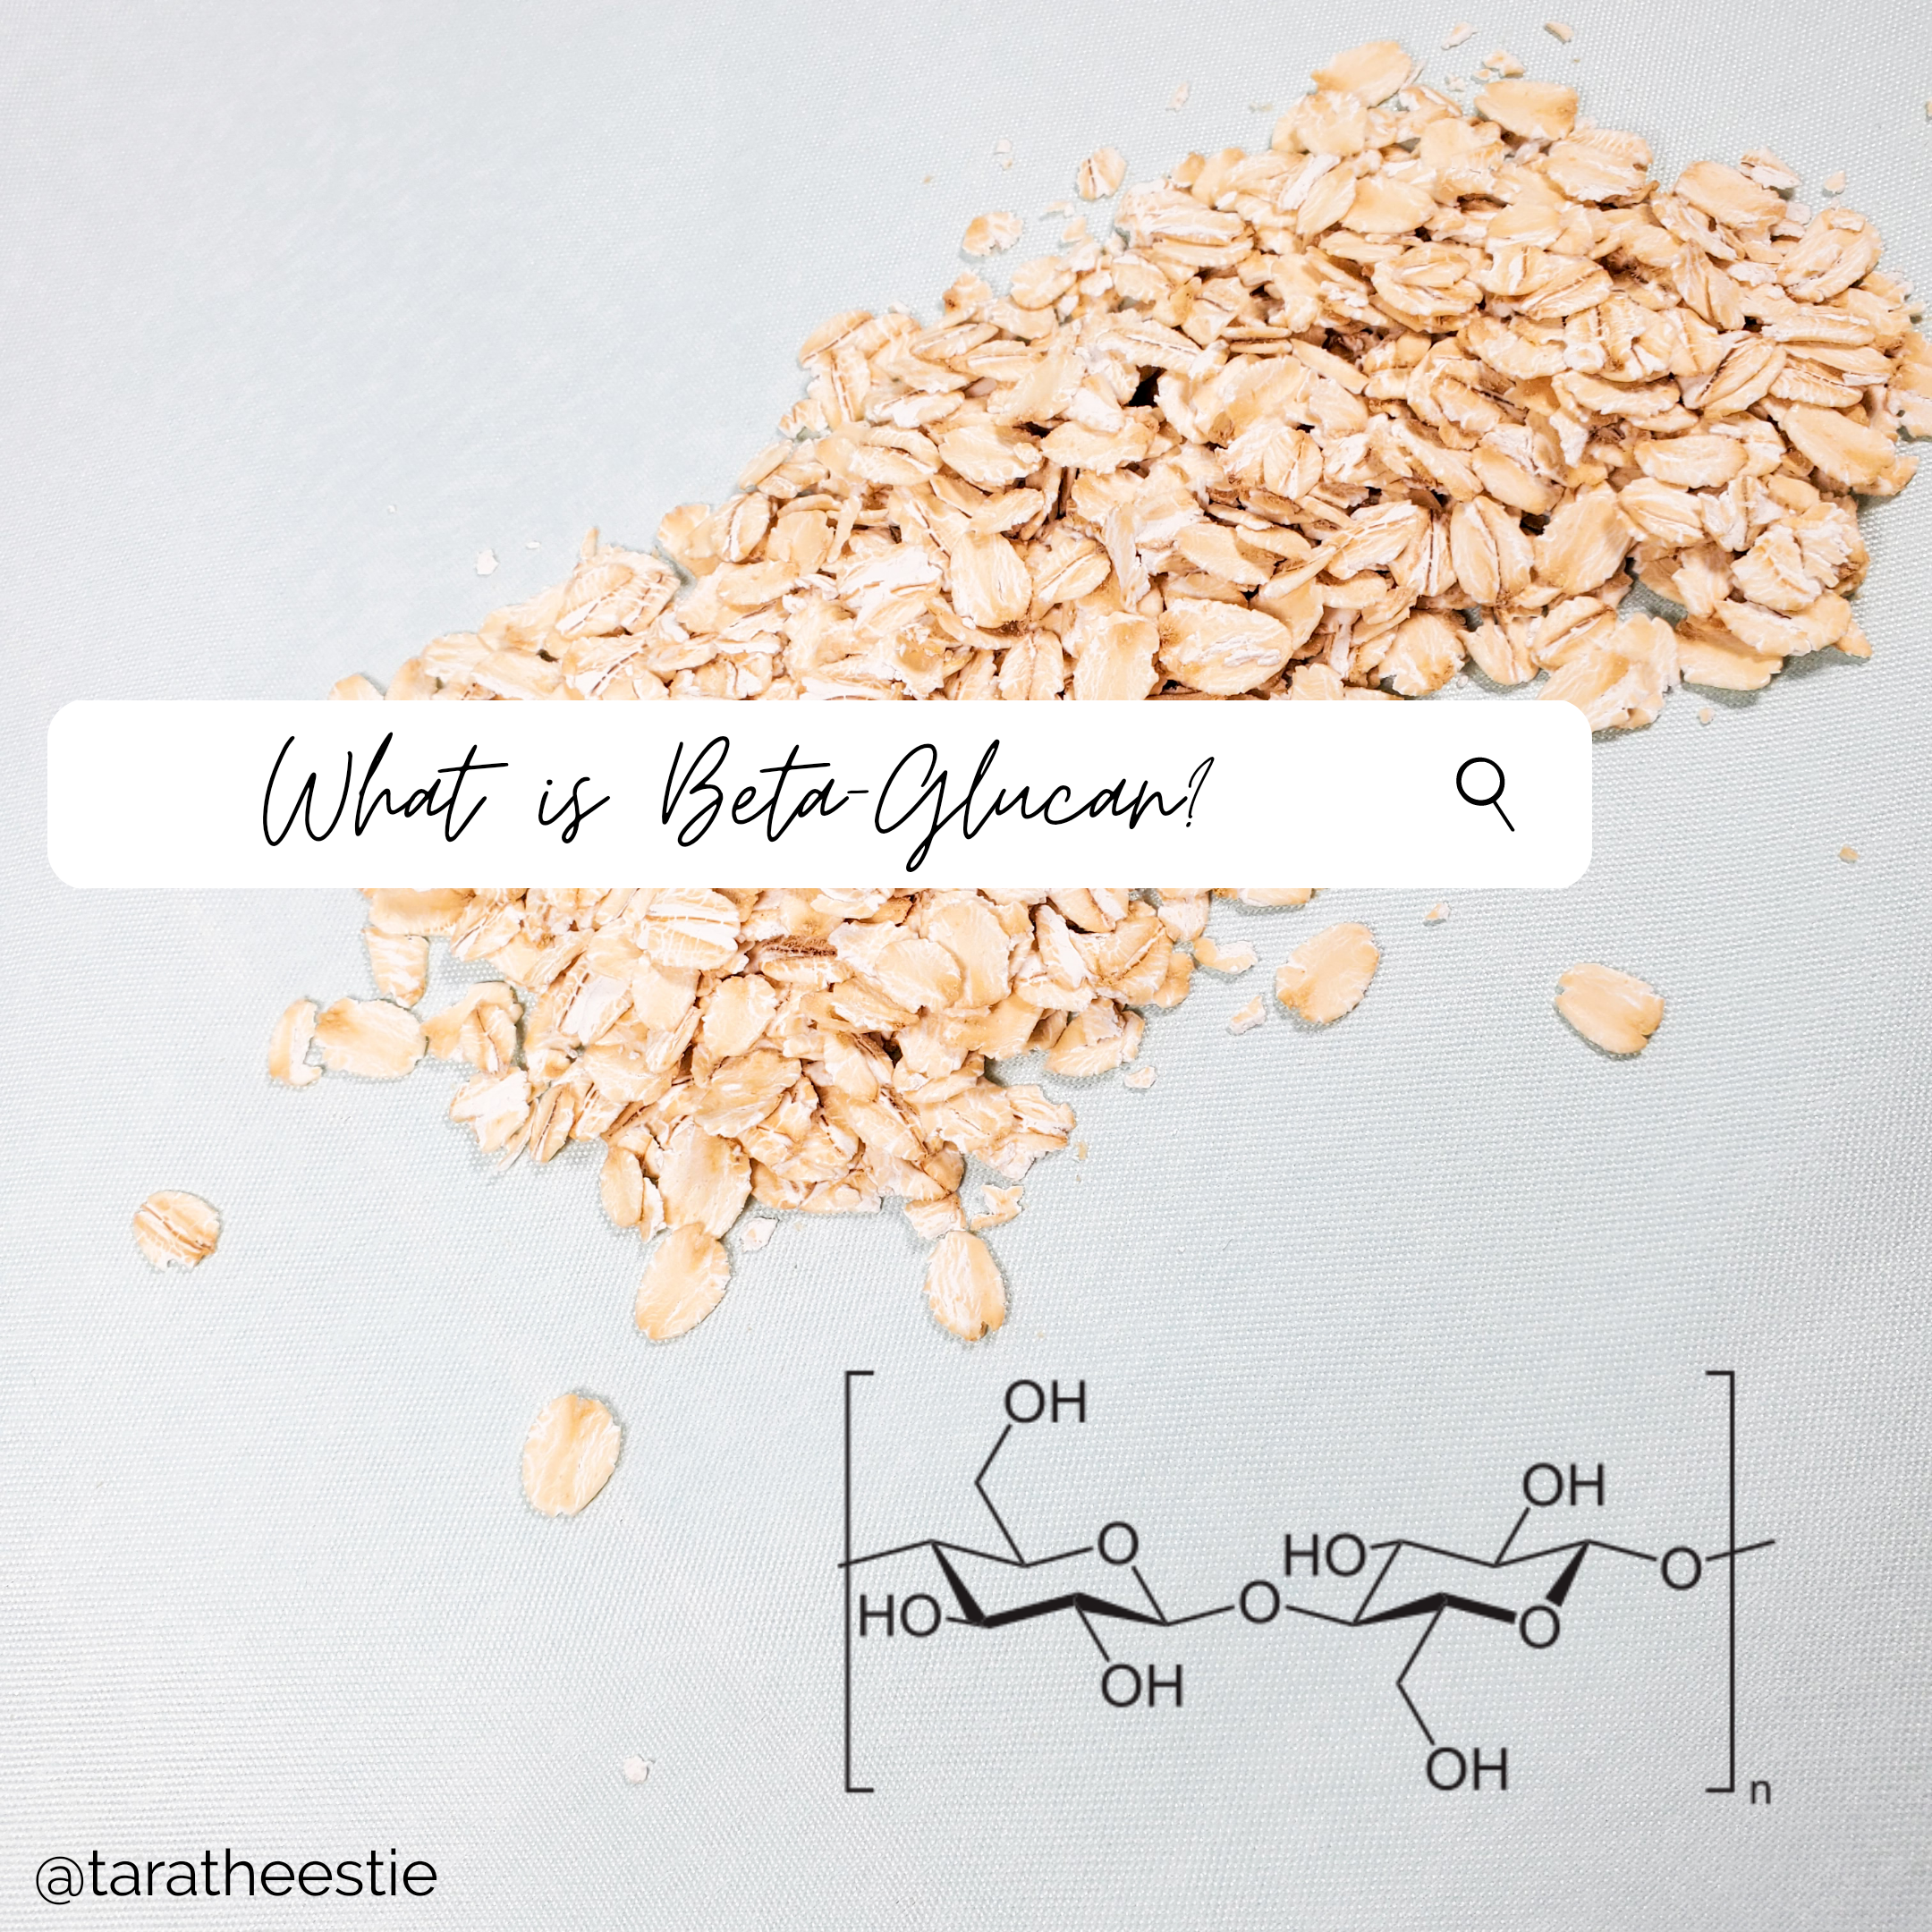 Beta-Glucan is the New Star of Your Skincare Routine!